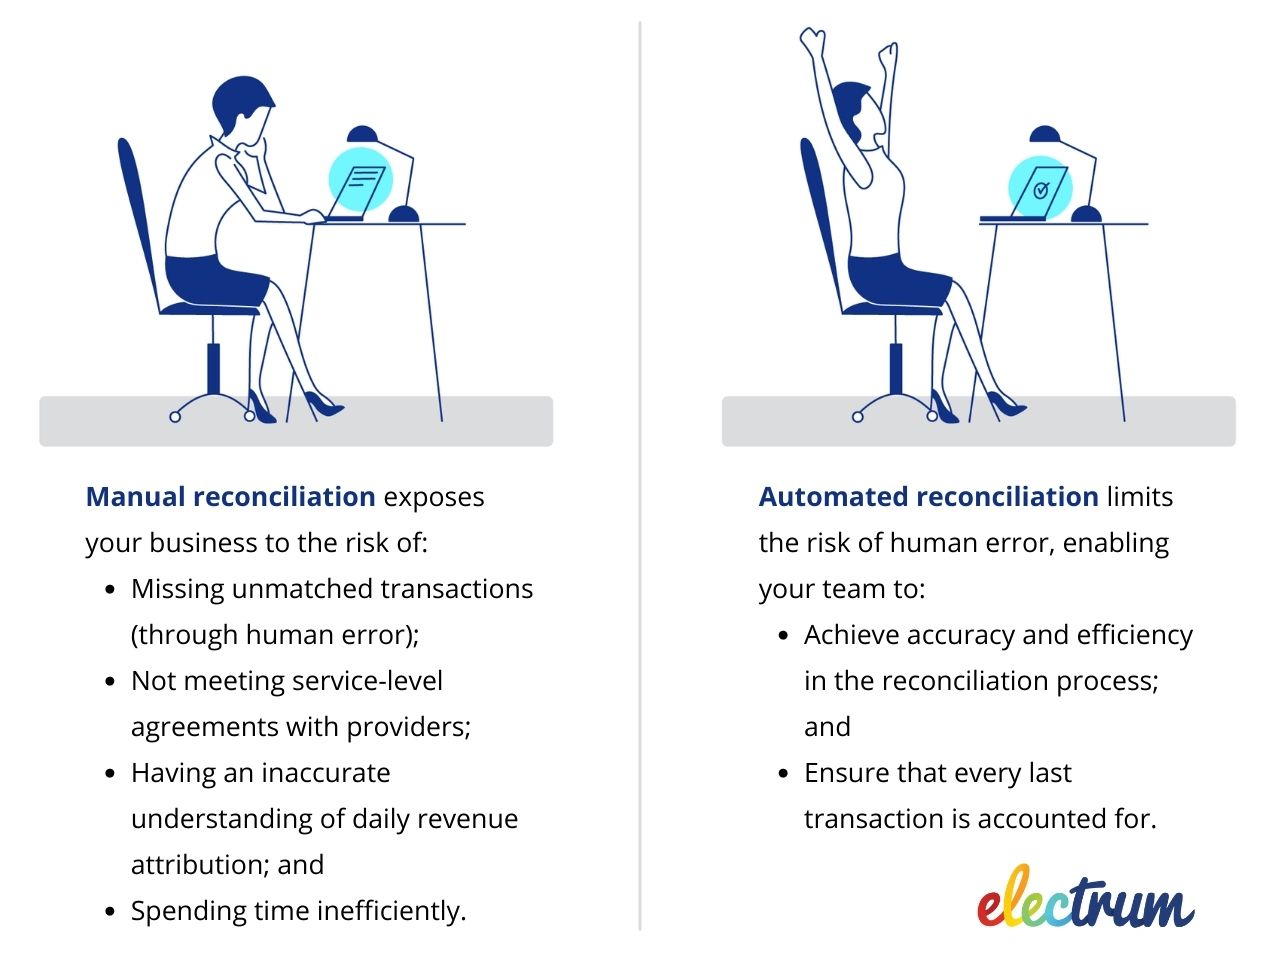 The risks of manual reconciliation versus the benefits of automated reconciliation